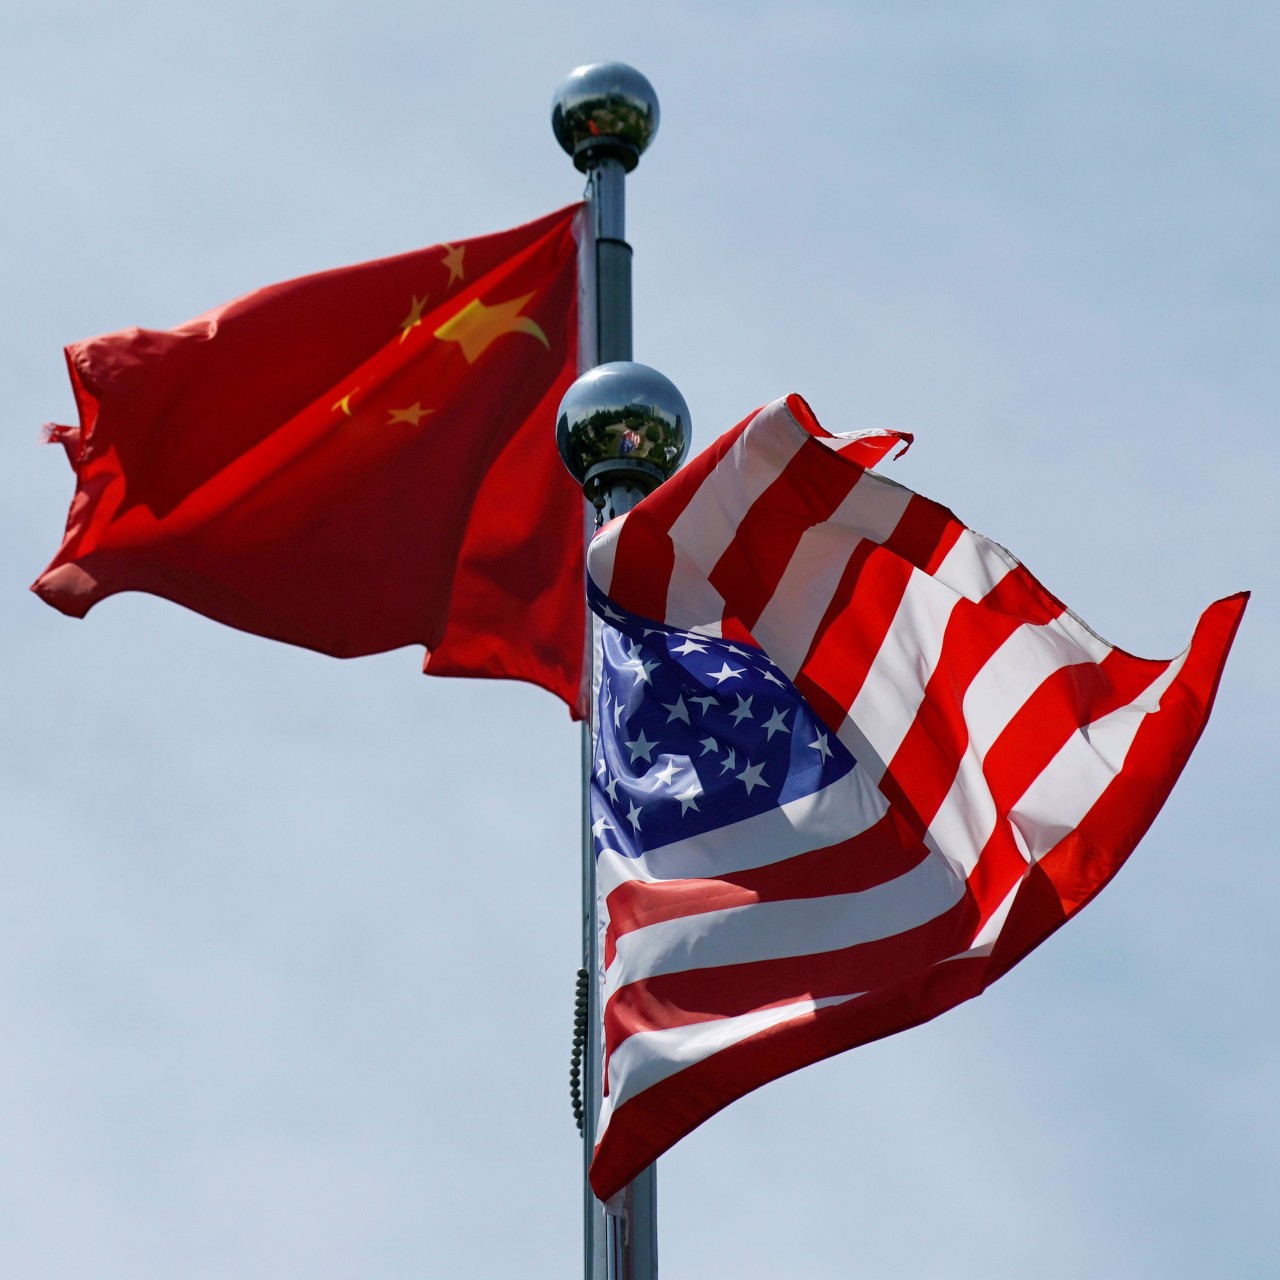 Image result for EXPERTS SAY U.S. TARIFF HIKES' IMPACT ON CHINA MANAGEABLE'